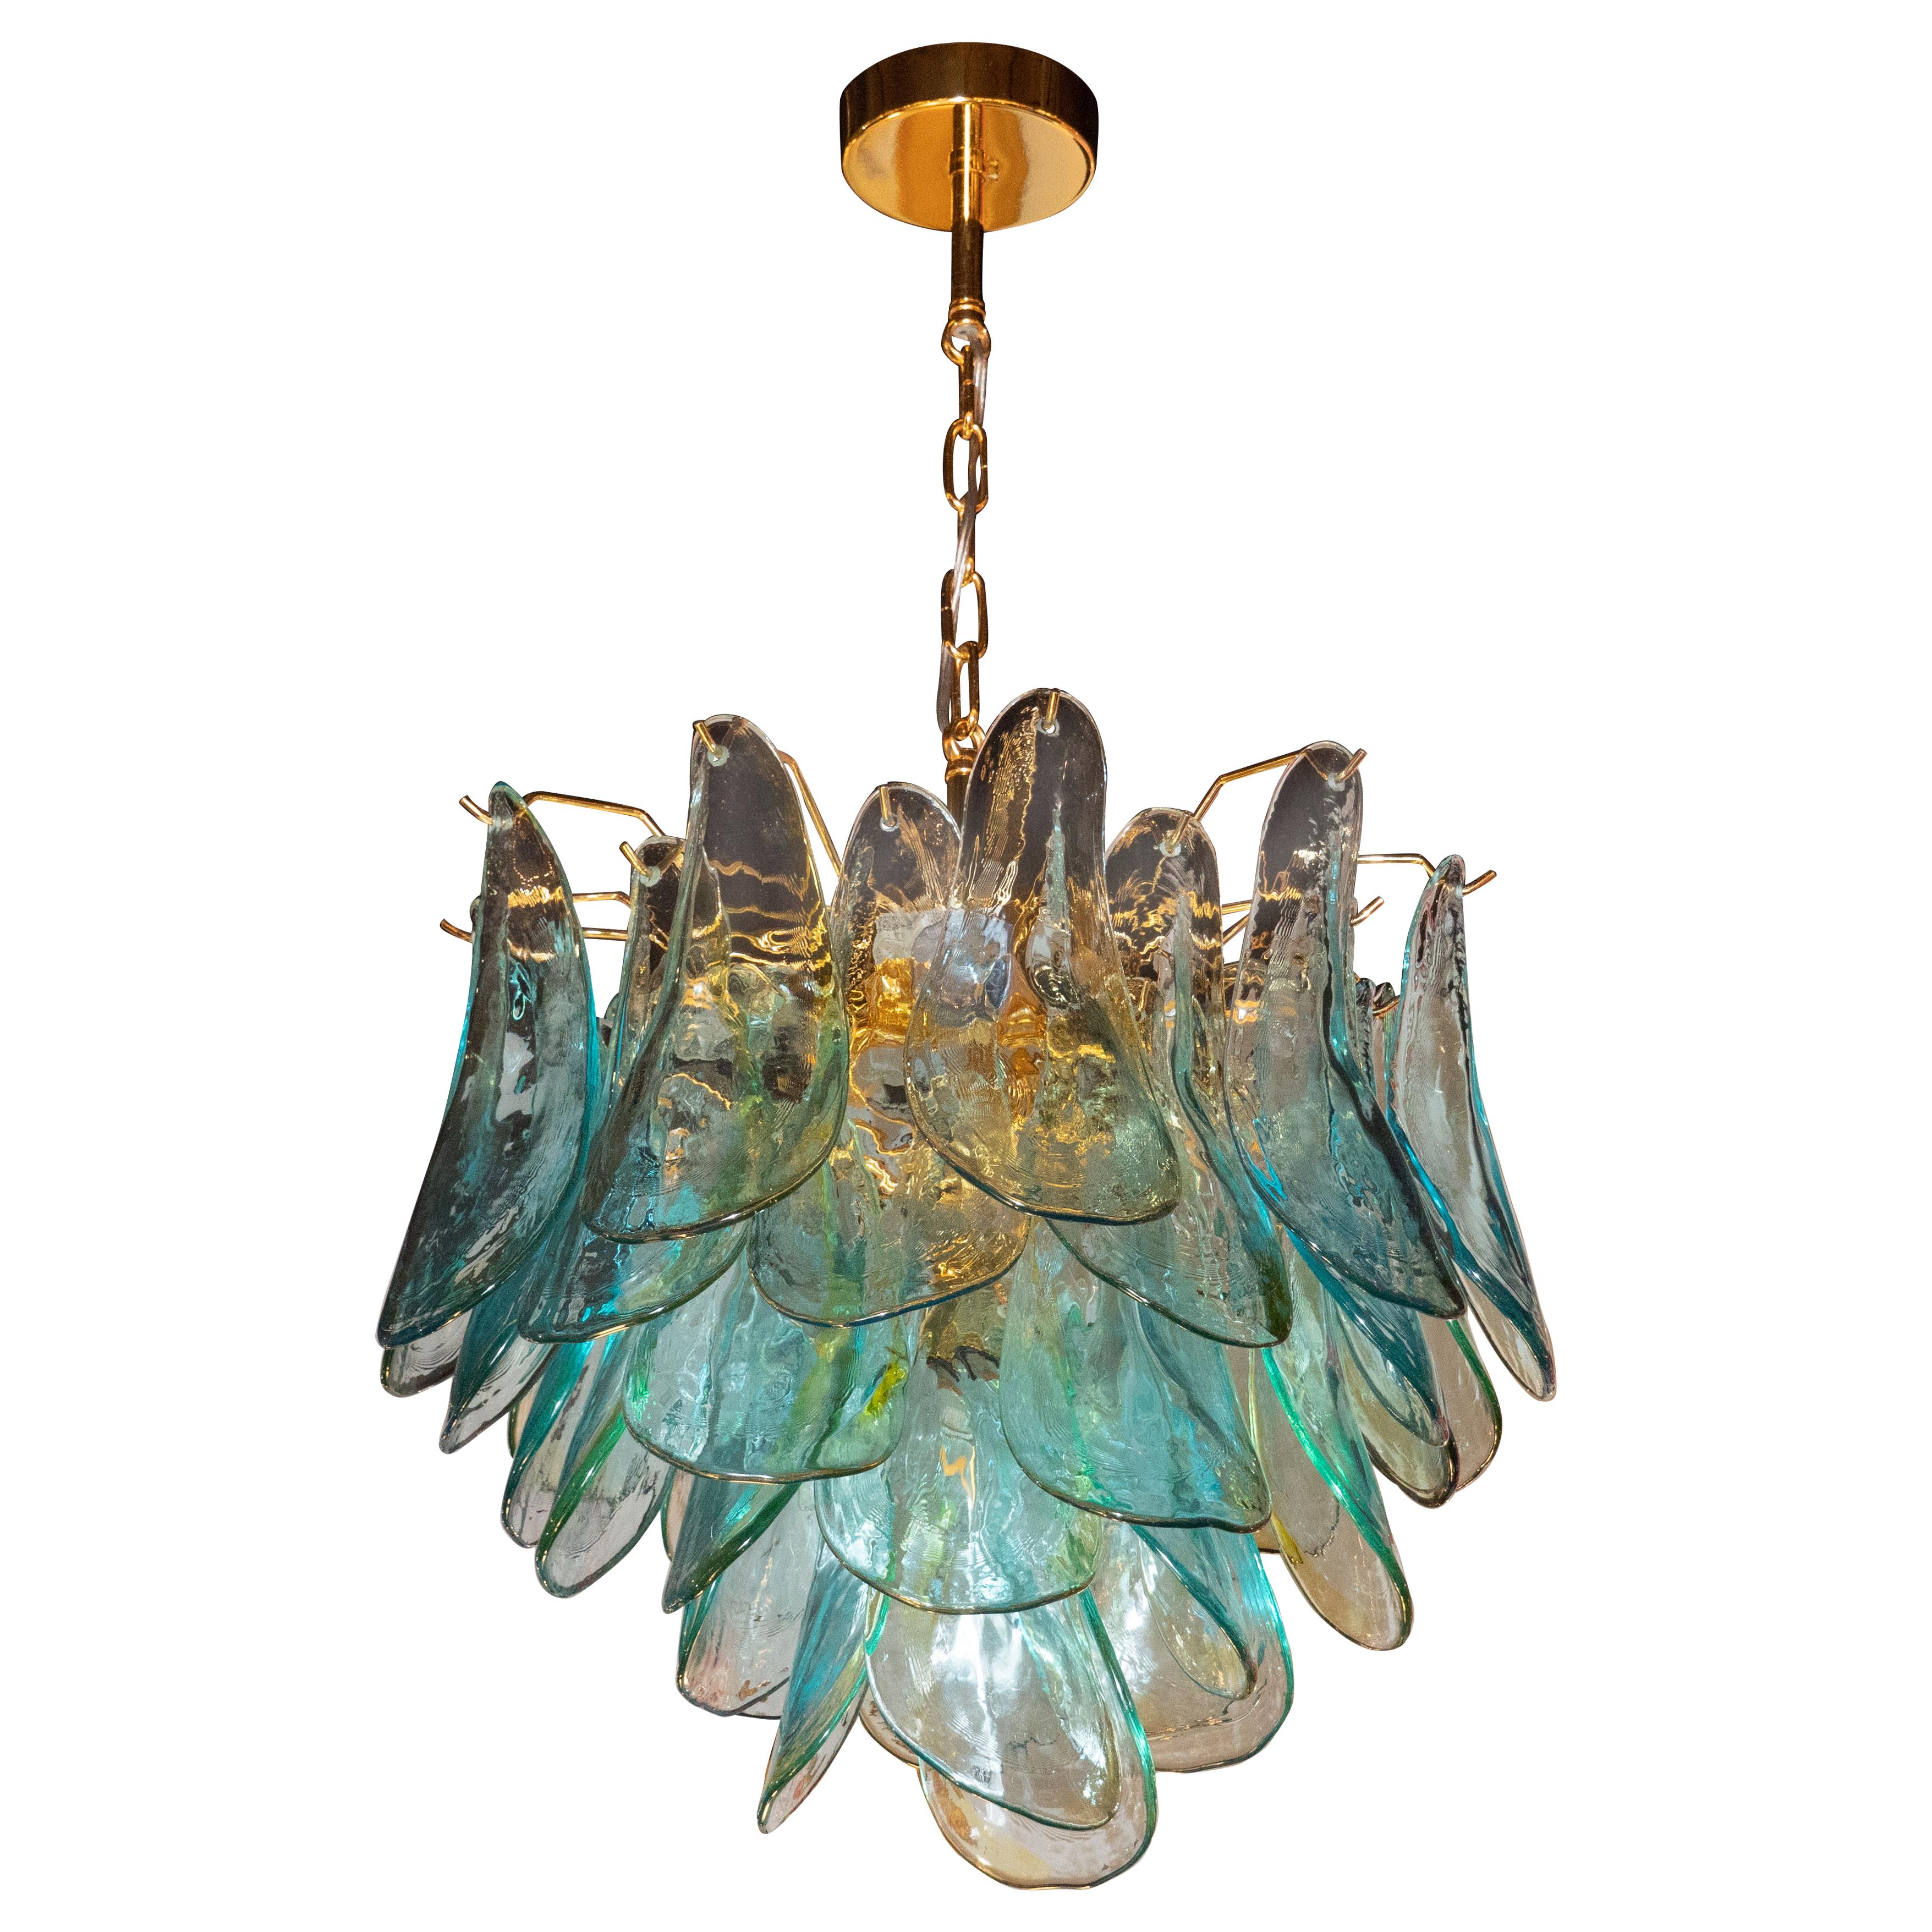 Mid-Century Modern Acqua Glass Peacock Chandelier by Barbini with Brass Fittings